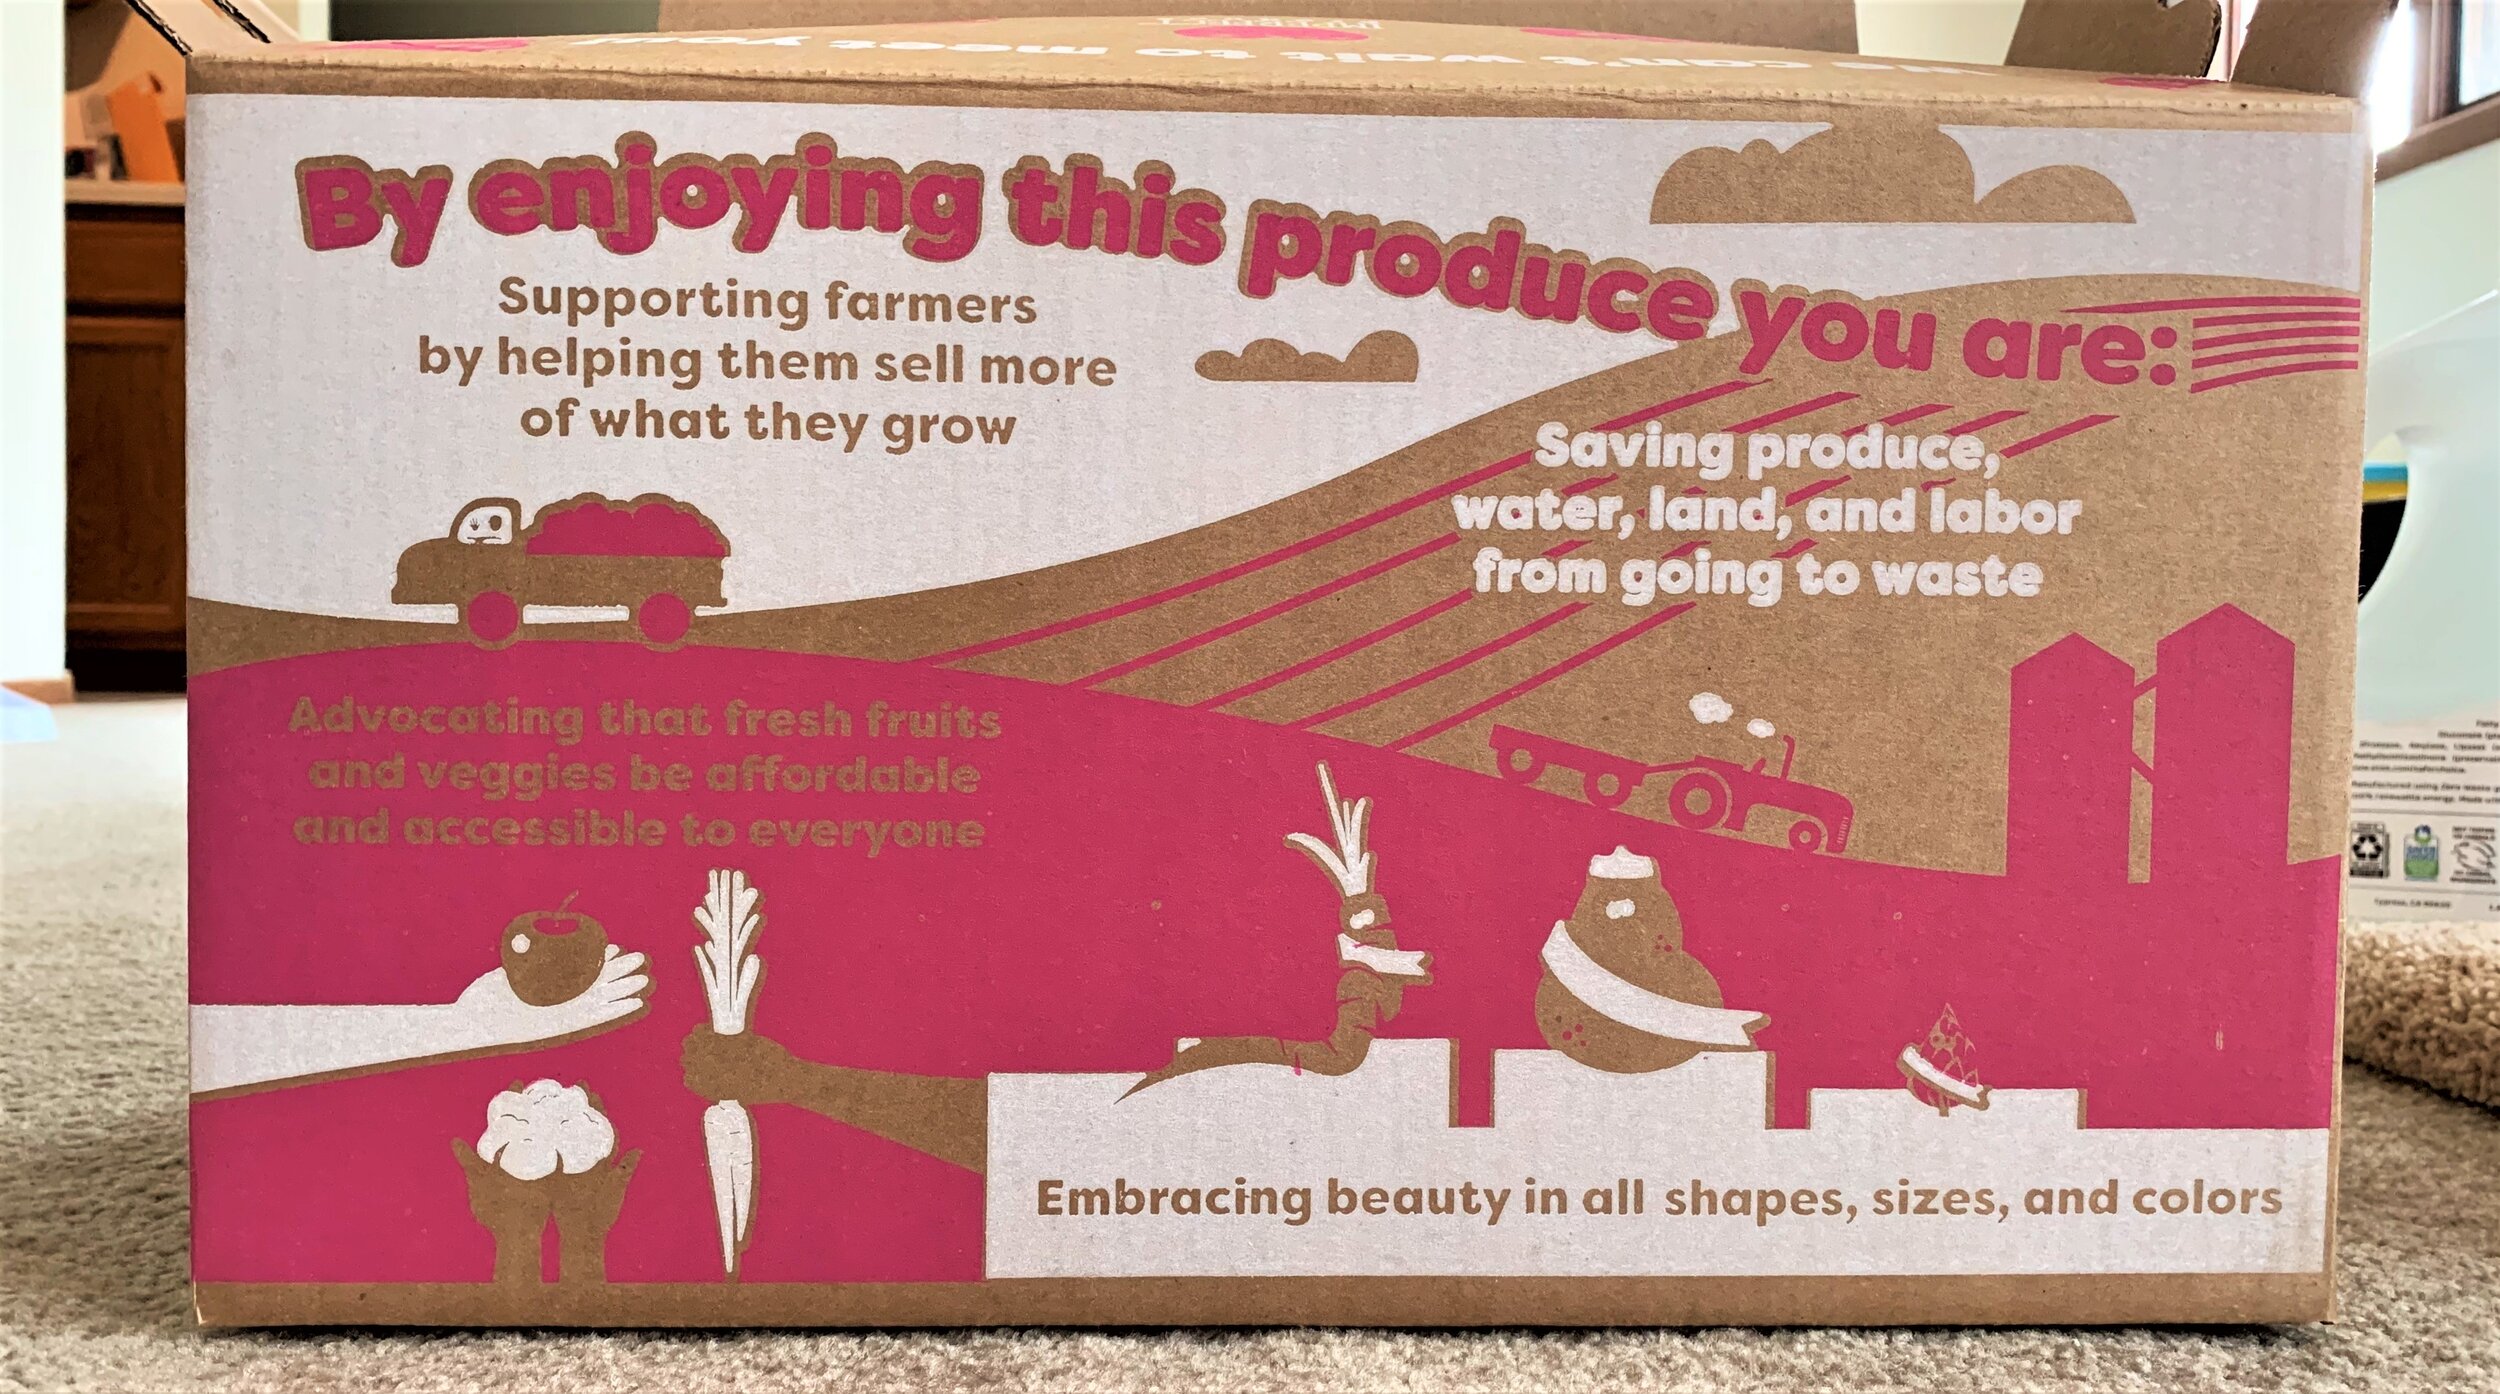 an Imperfect Produce cardboard box that mentions supporting farmers and saving produce, water, land, and labor from going to waste